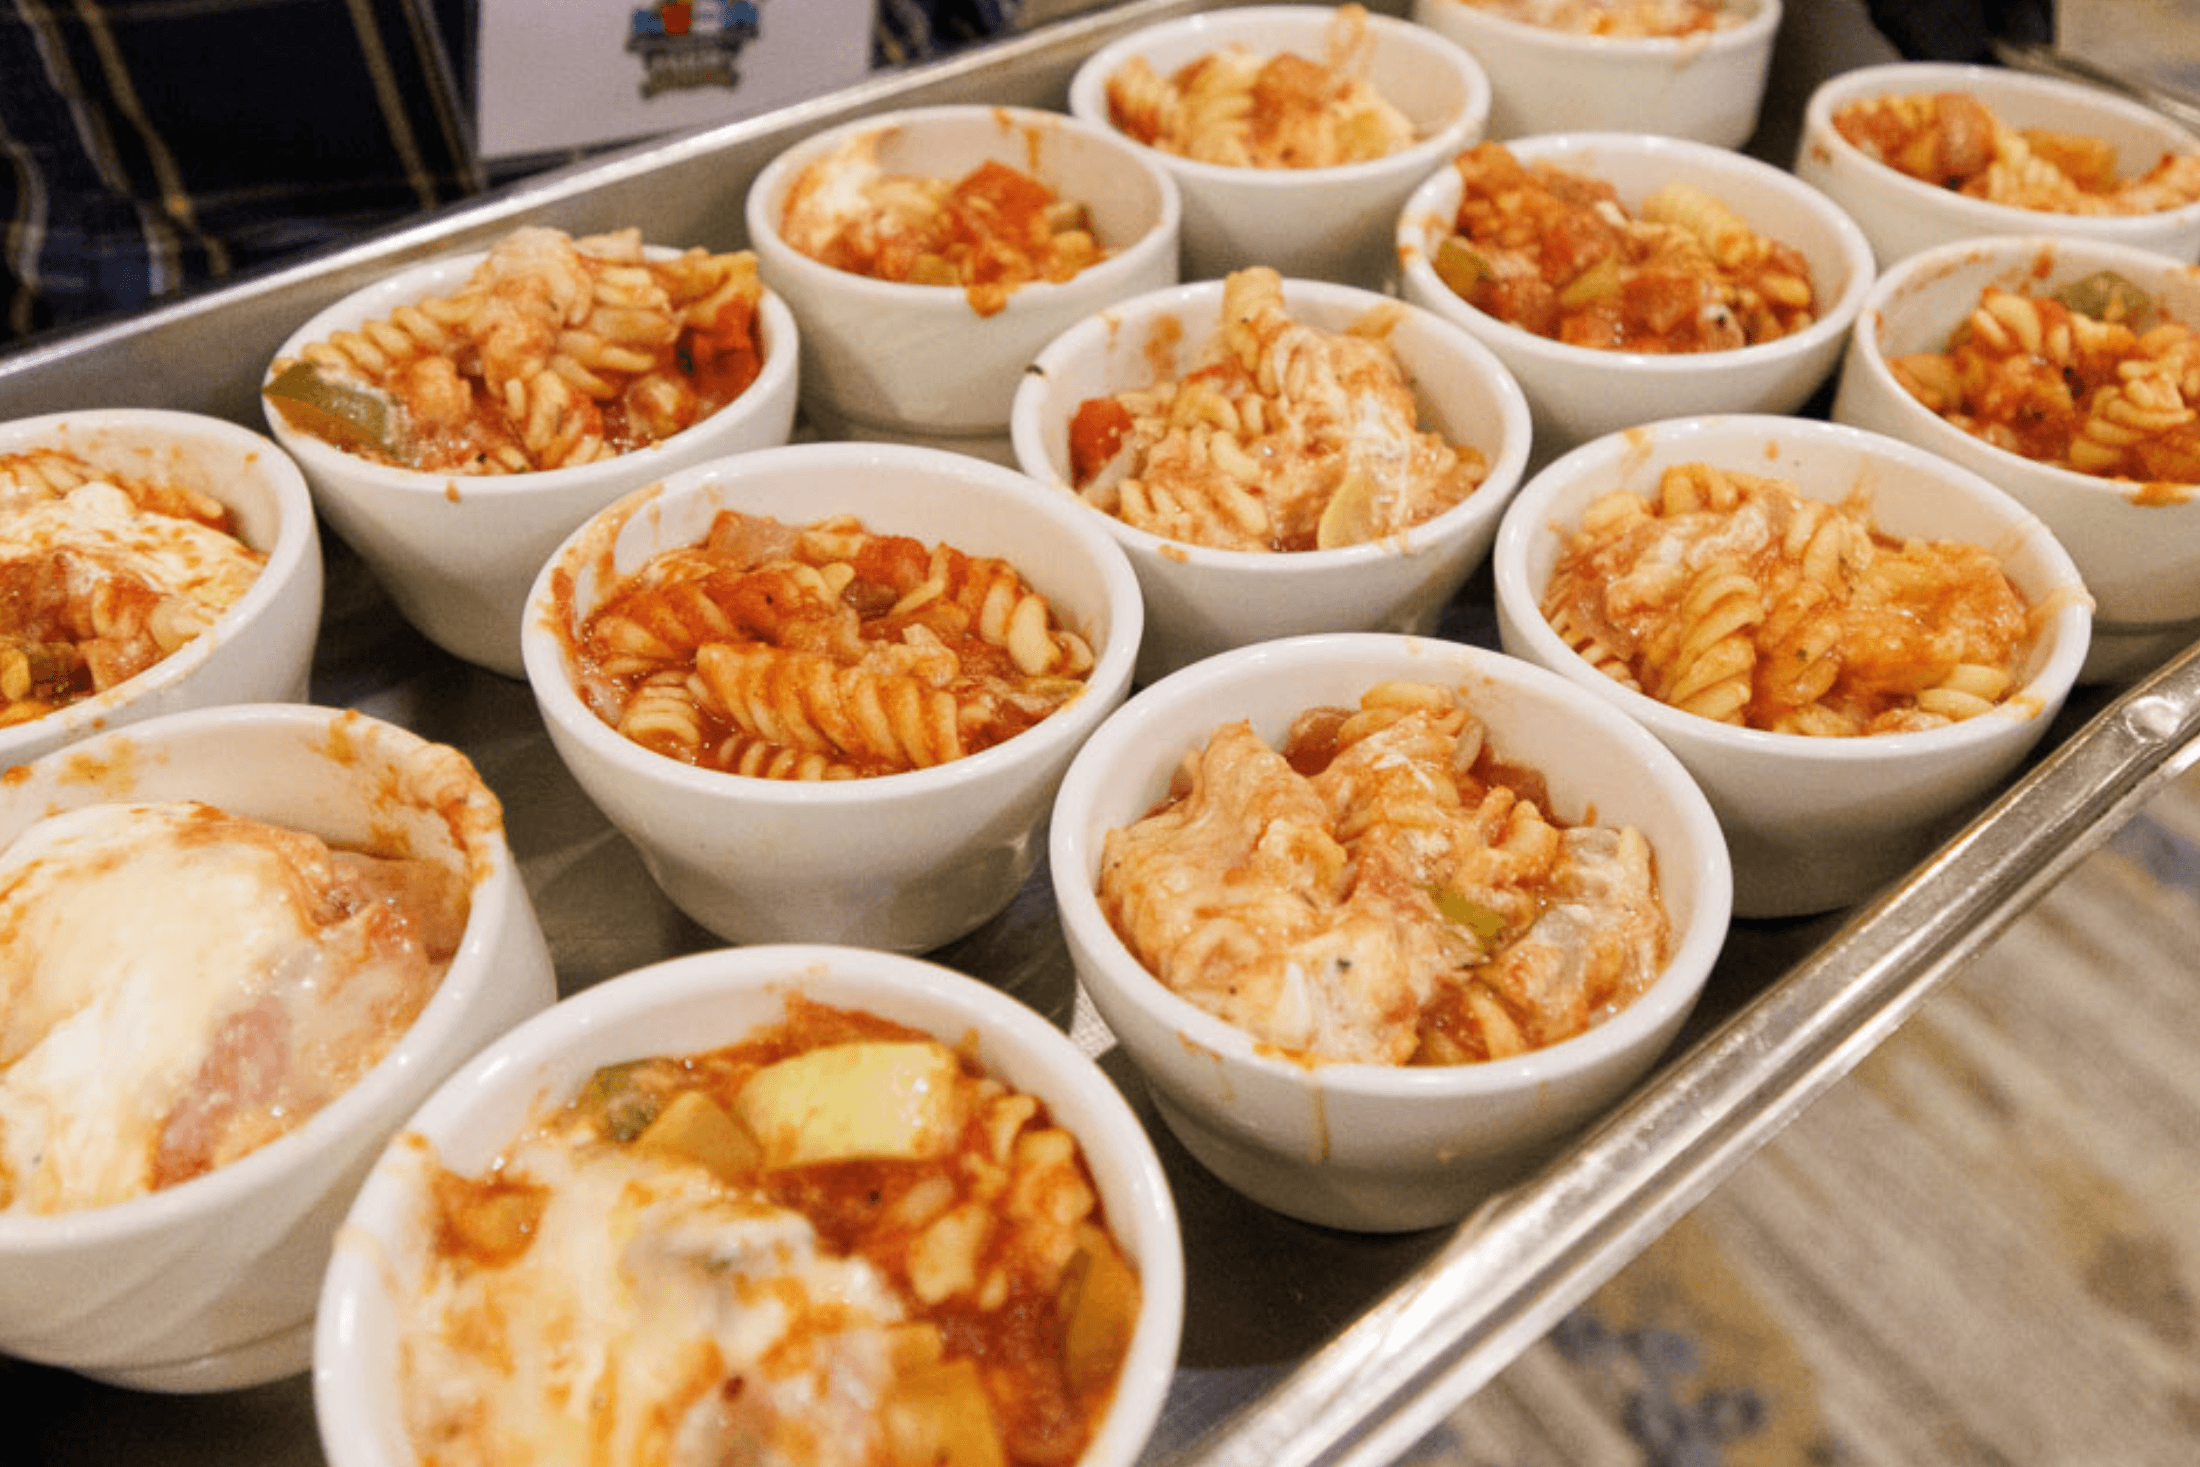 Lunch – Cheesy Baked Pasta with Veggies